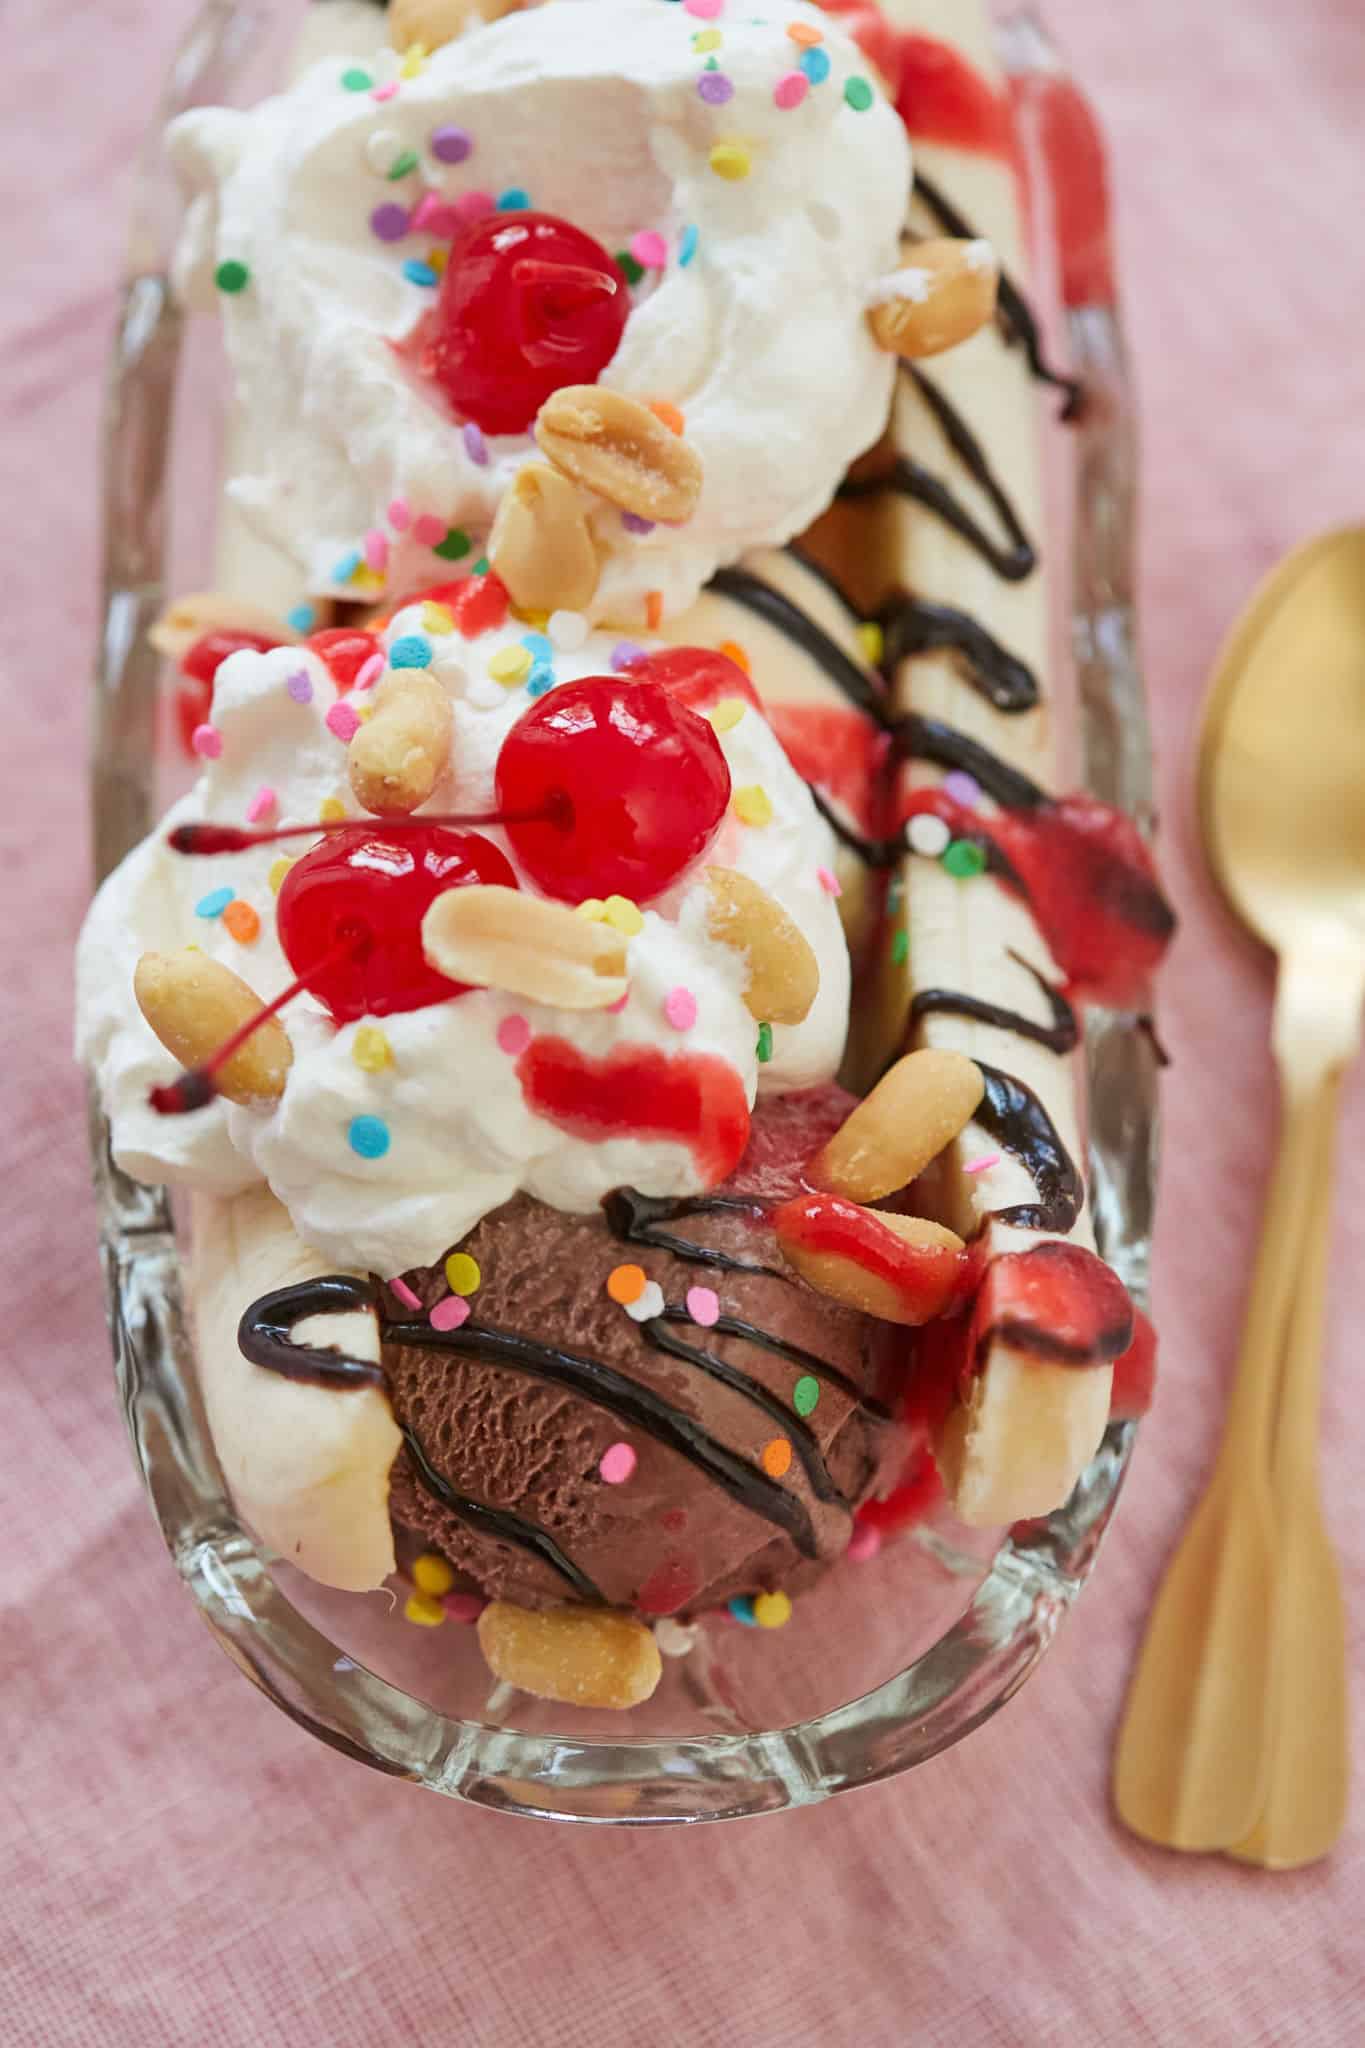 A close-up look at the toppings on the homemade banana split.